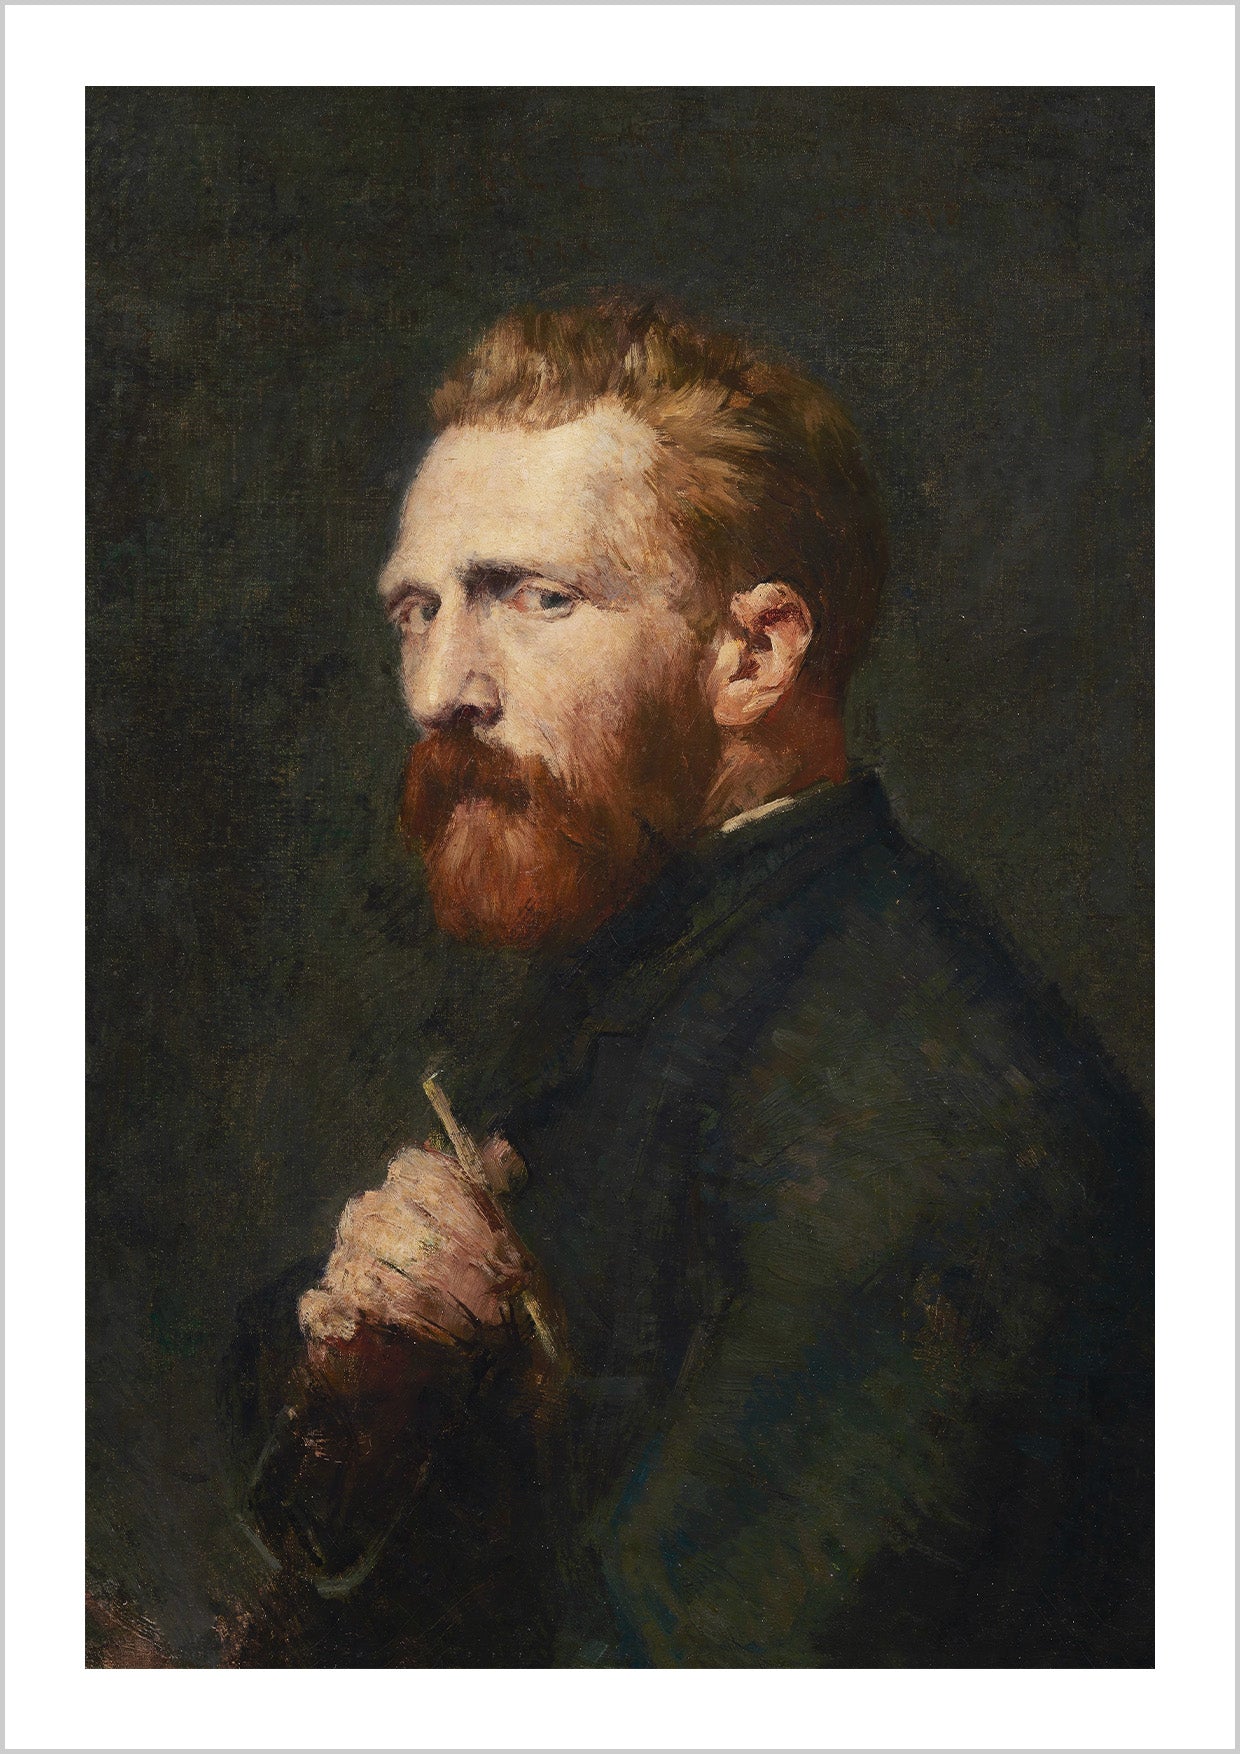 Portrait Oil Painting of Vincent Van Gogh by artist John Russell, circa 1886.